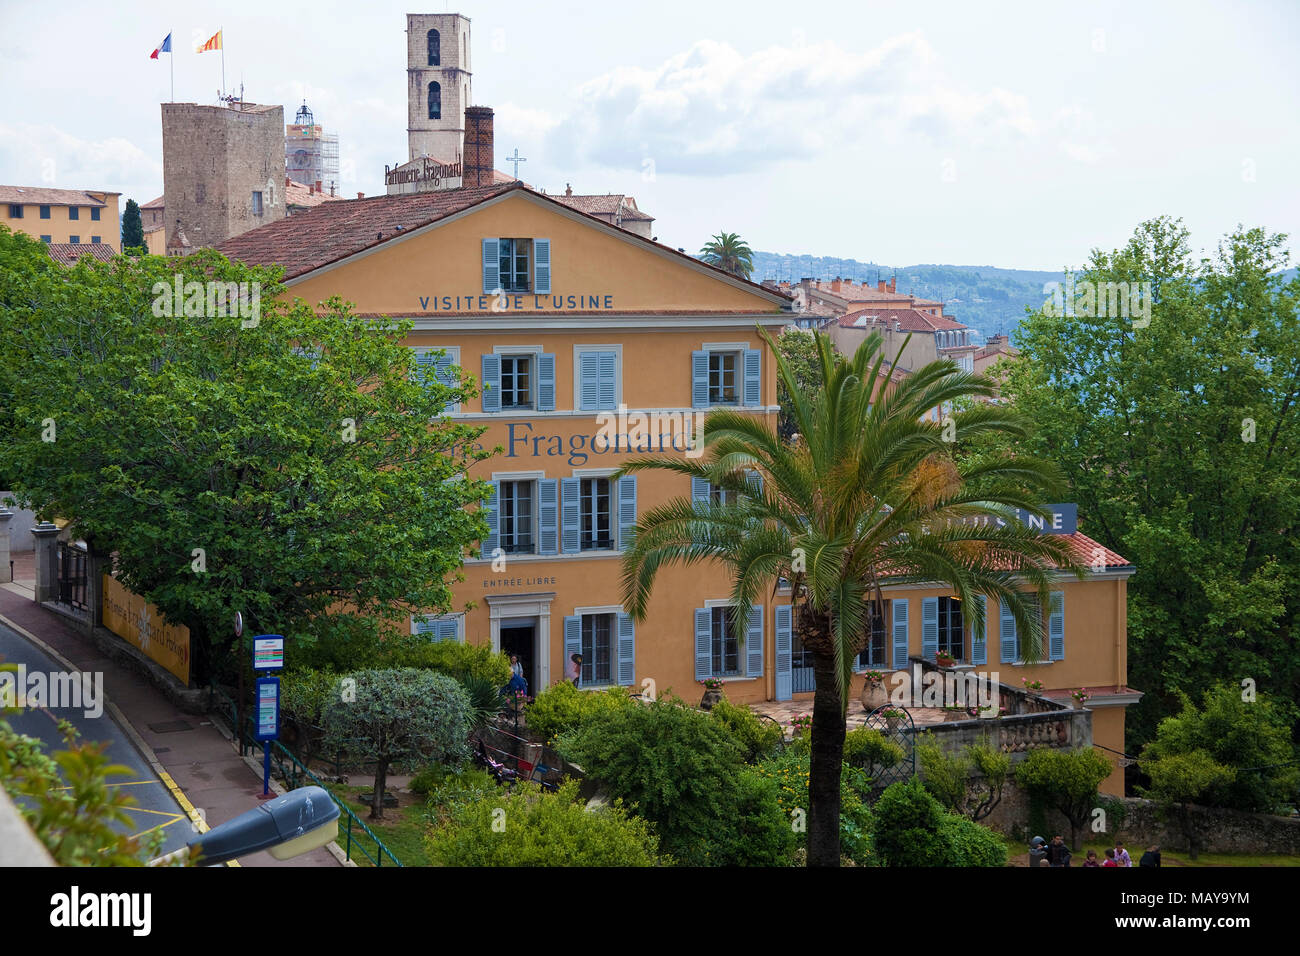 Fragonard perfum museum, behind the cathedral Notre-Dame du Puy, Grasse, Alpes-Maritimes, South France, France, Europe Stock Photo